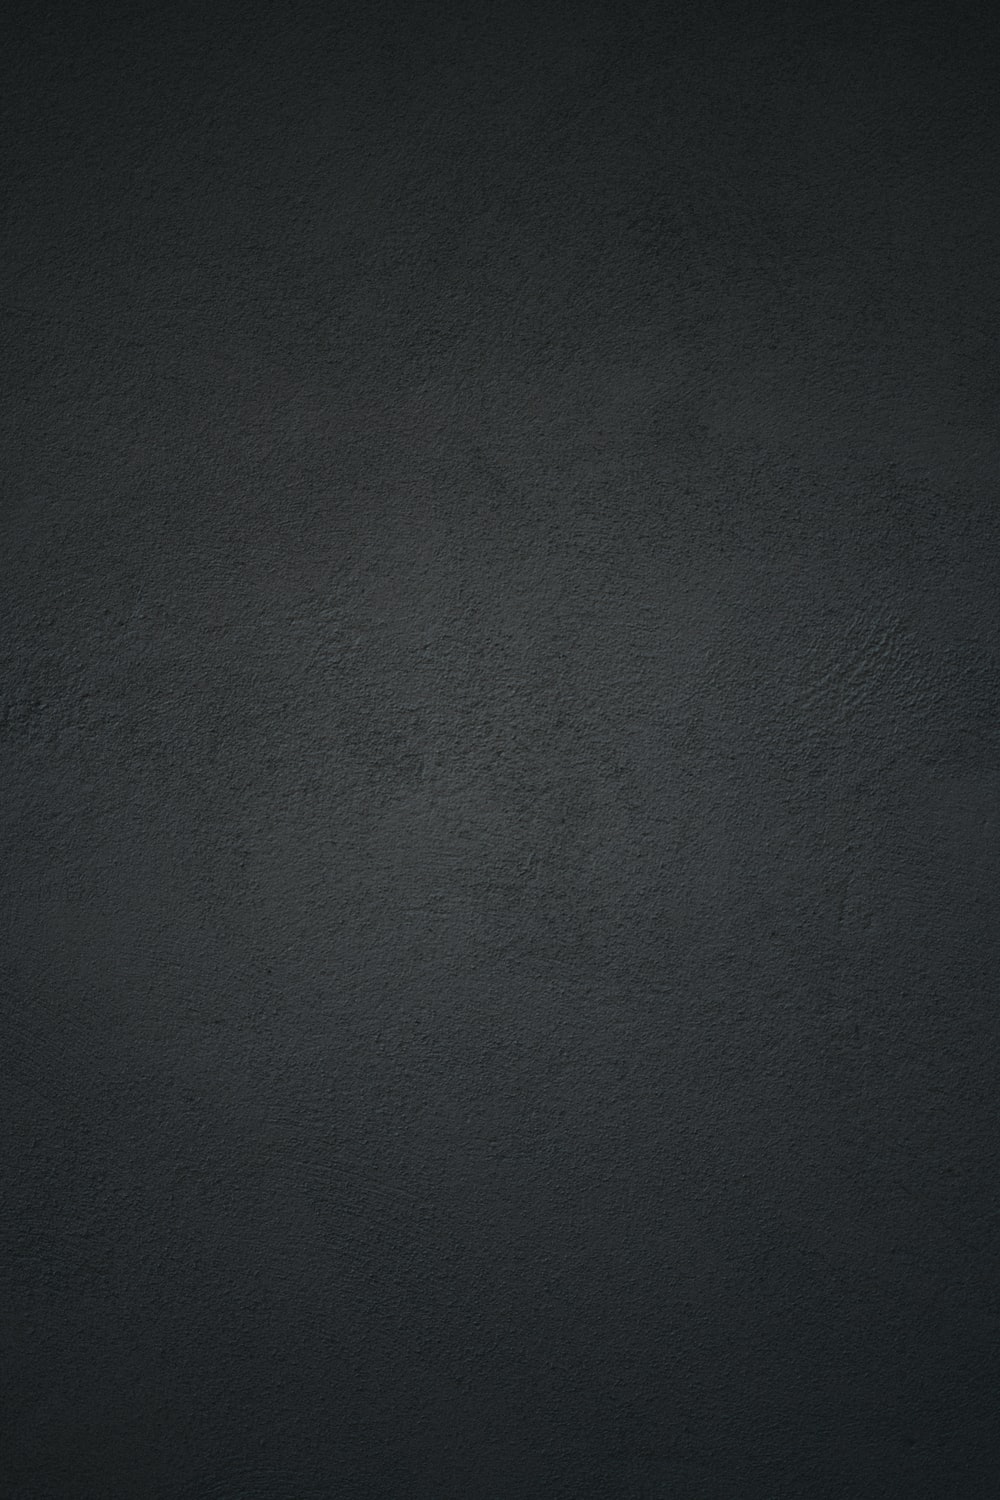 Grey Wallpapers: Free HD Download [500+ HQ]